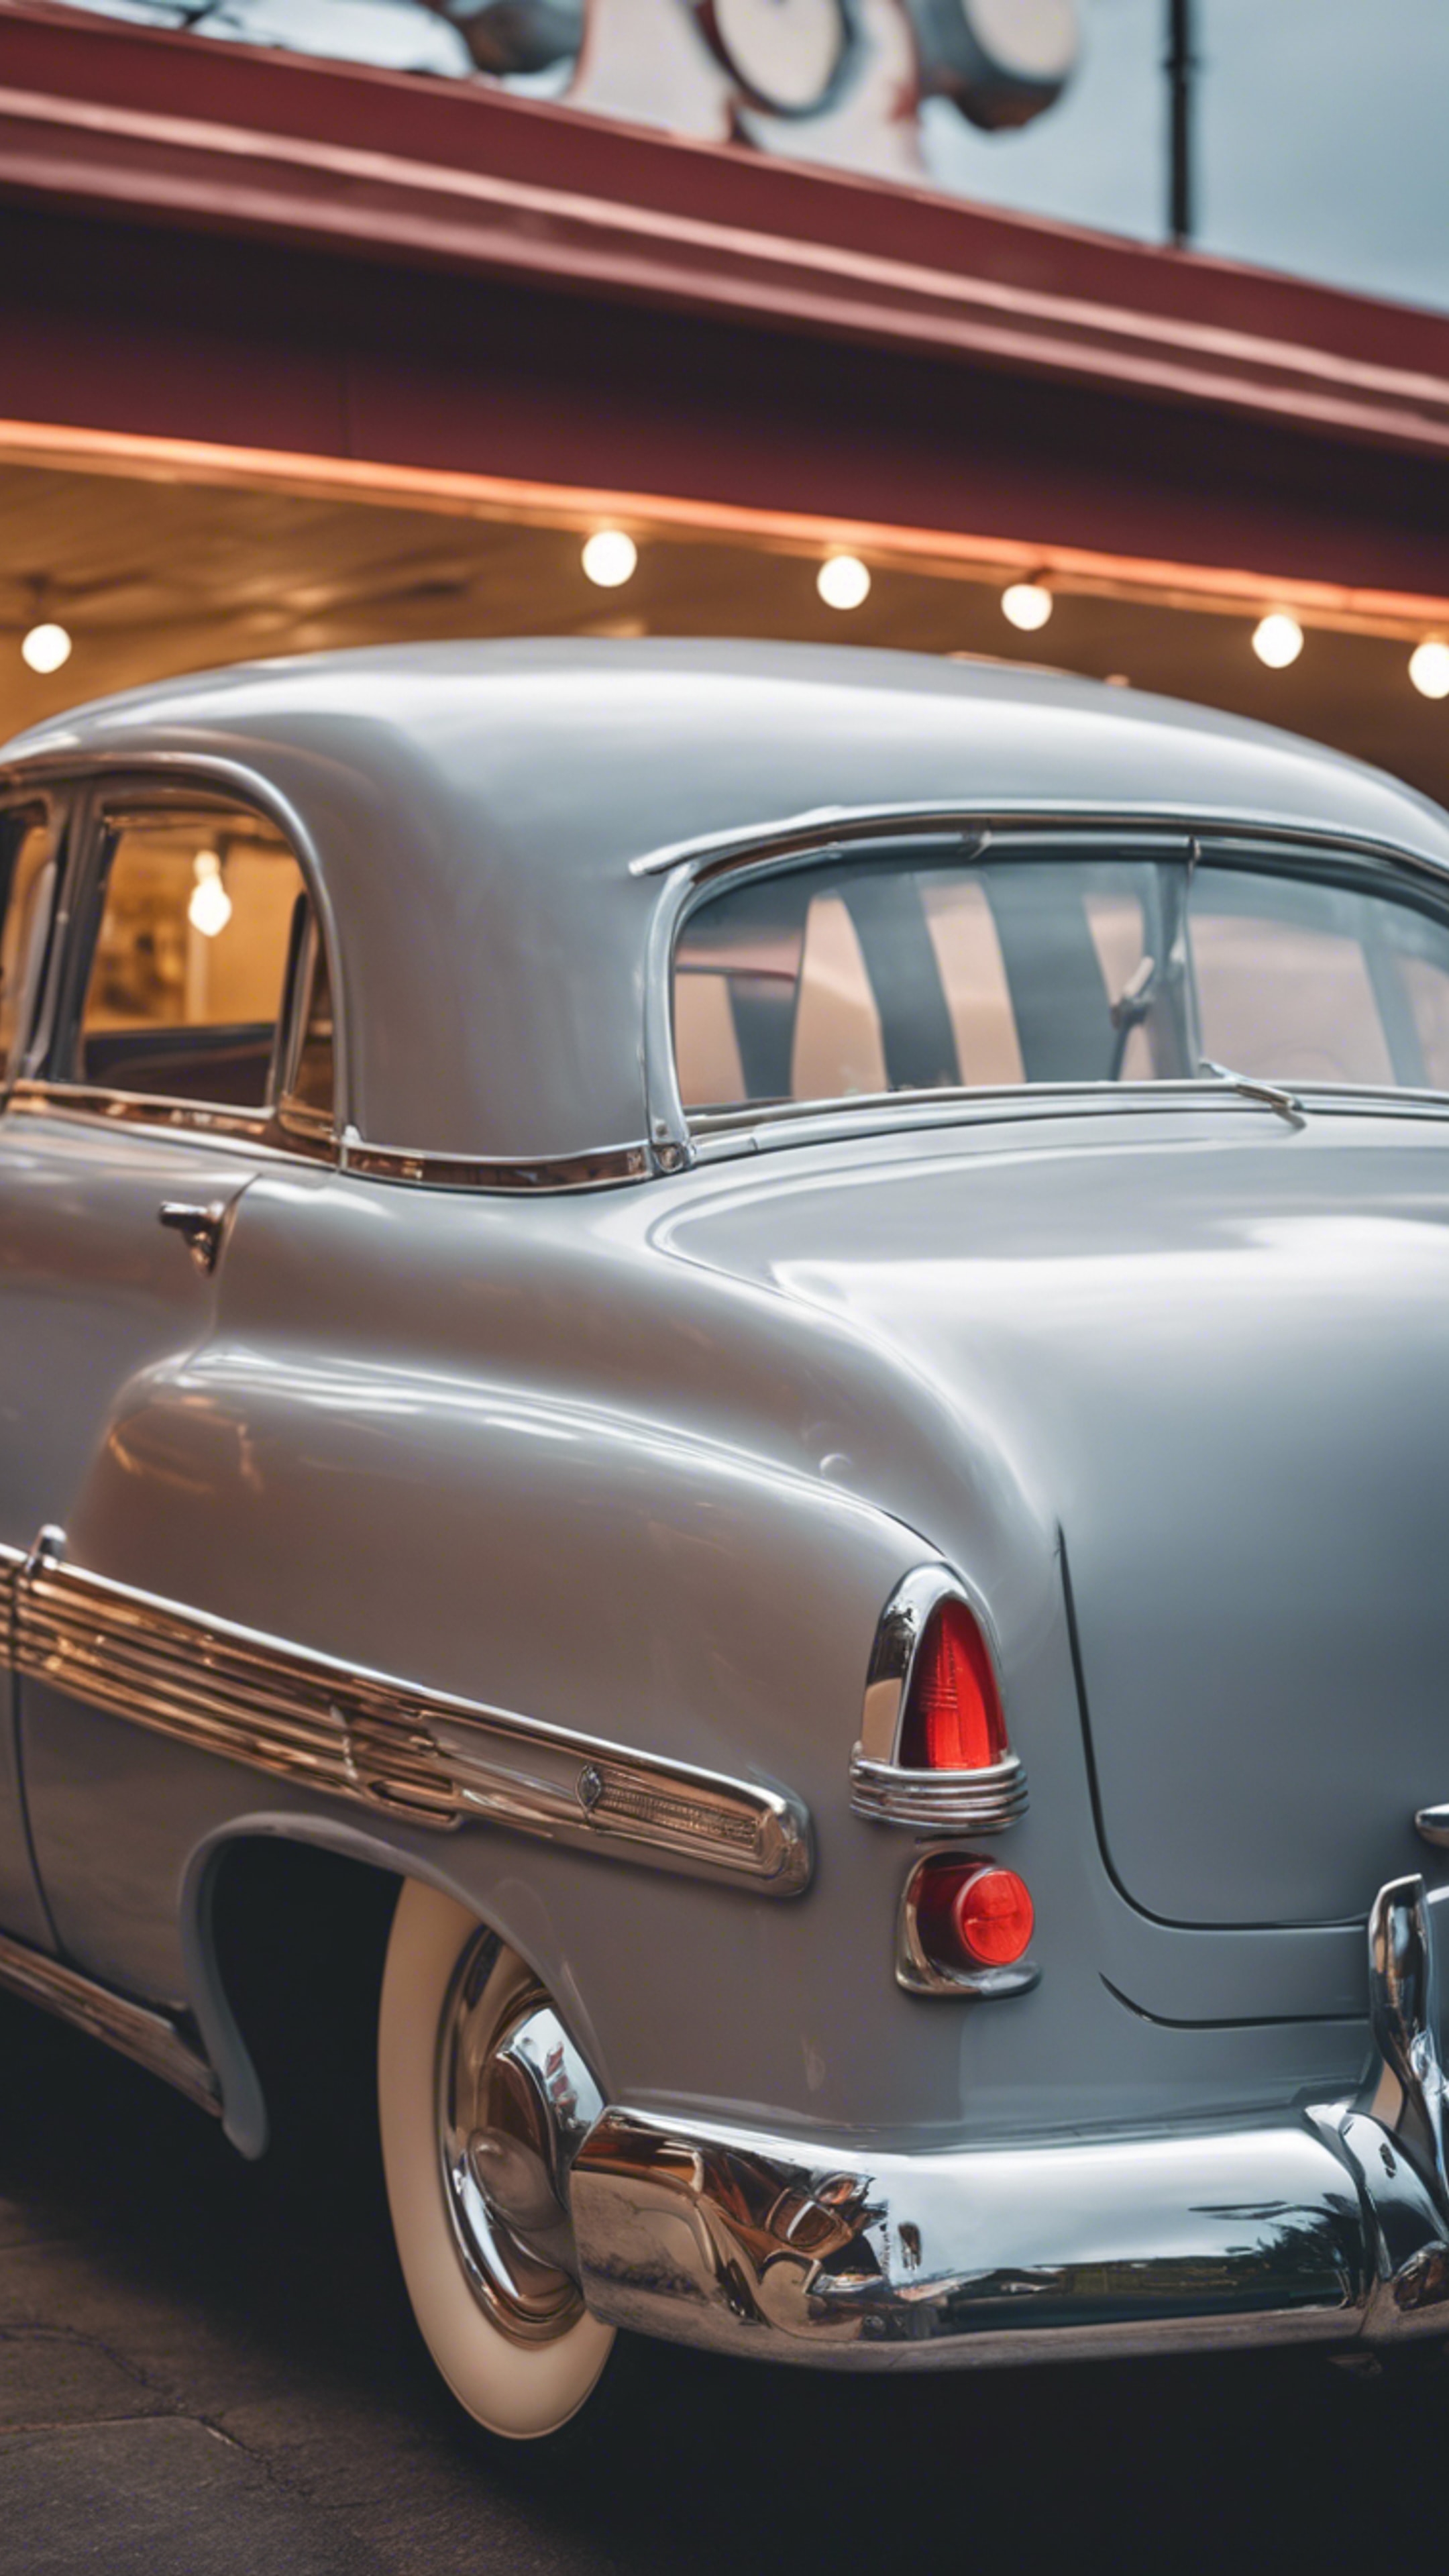 A vintage 1950s car, painted in light gray, parked outside a quirky roadside diner. 墙纸[6f1ad1f93eb7446a85d1]